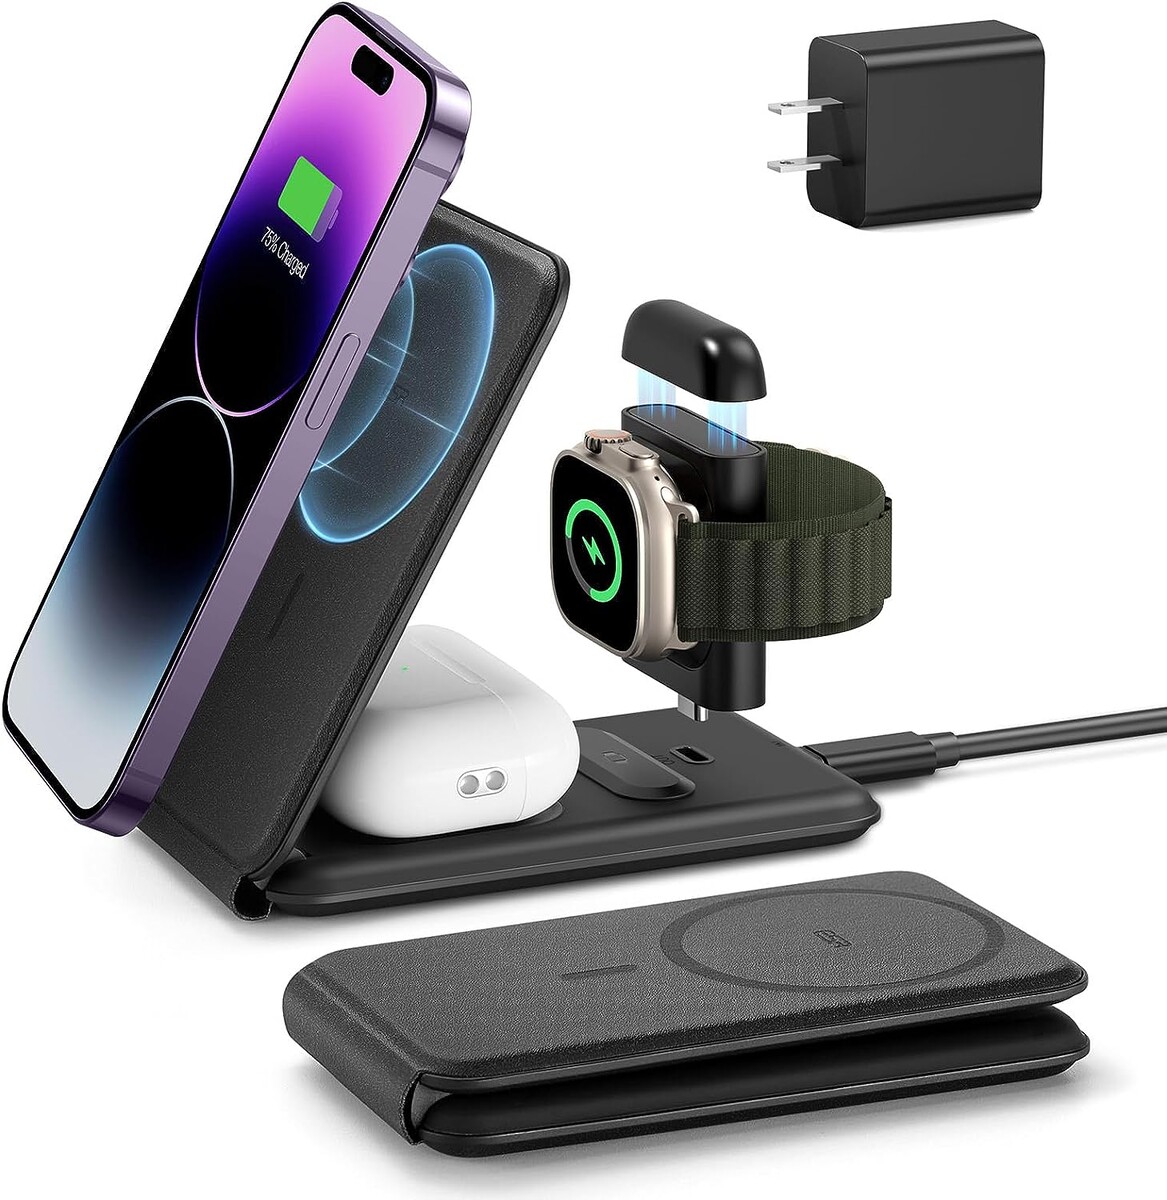 ESR 3-in-1 Travel Wireless Charging Set integrates a detachable Apple Watch  charger as well as a foldable design and MagSafe -  News